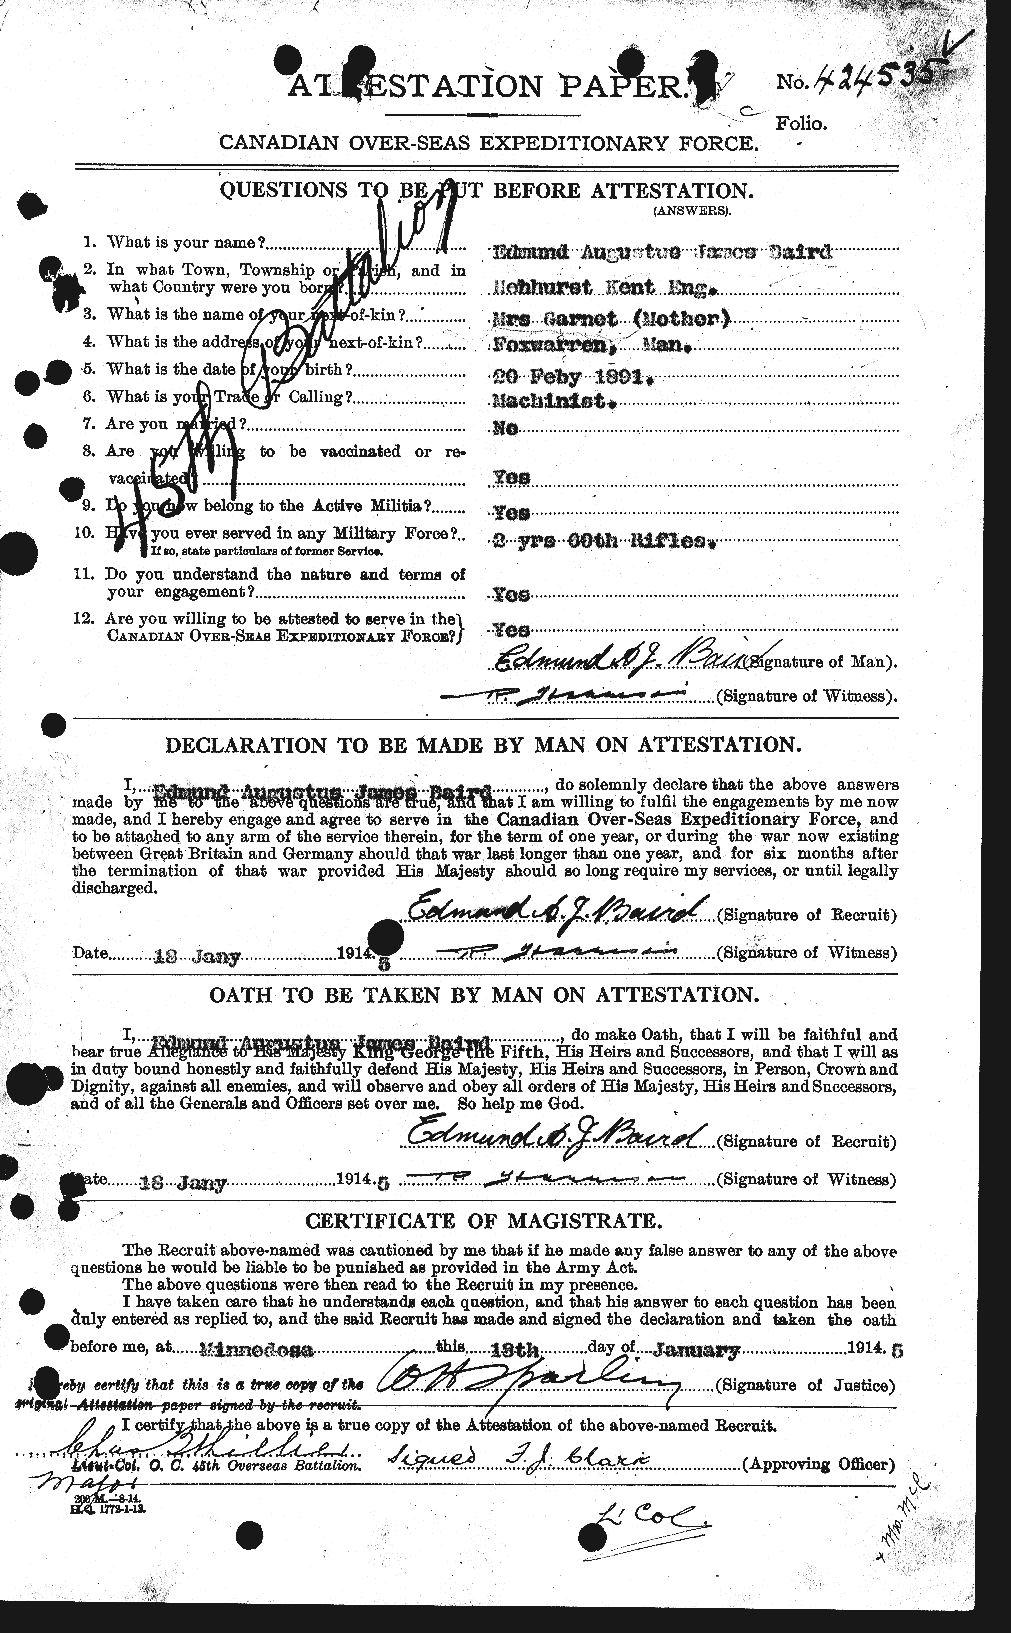 Personnel Records of the First World War - CEF 226690a